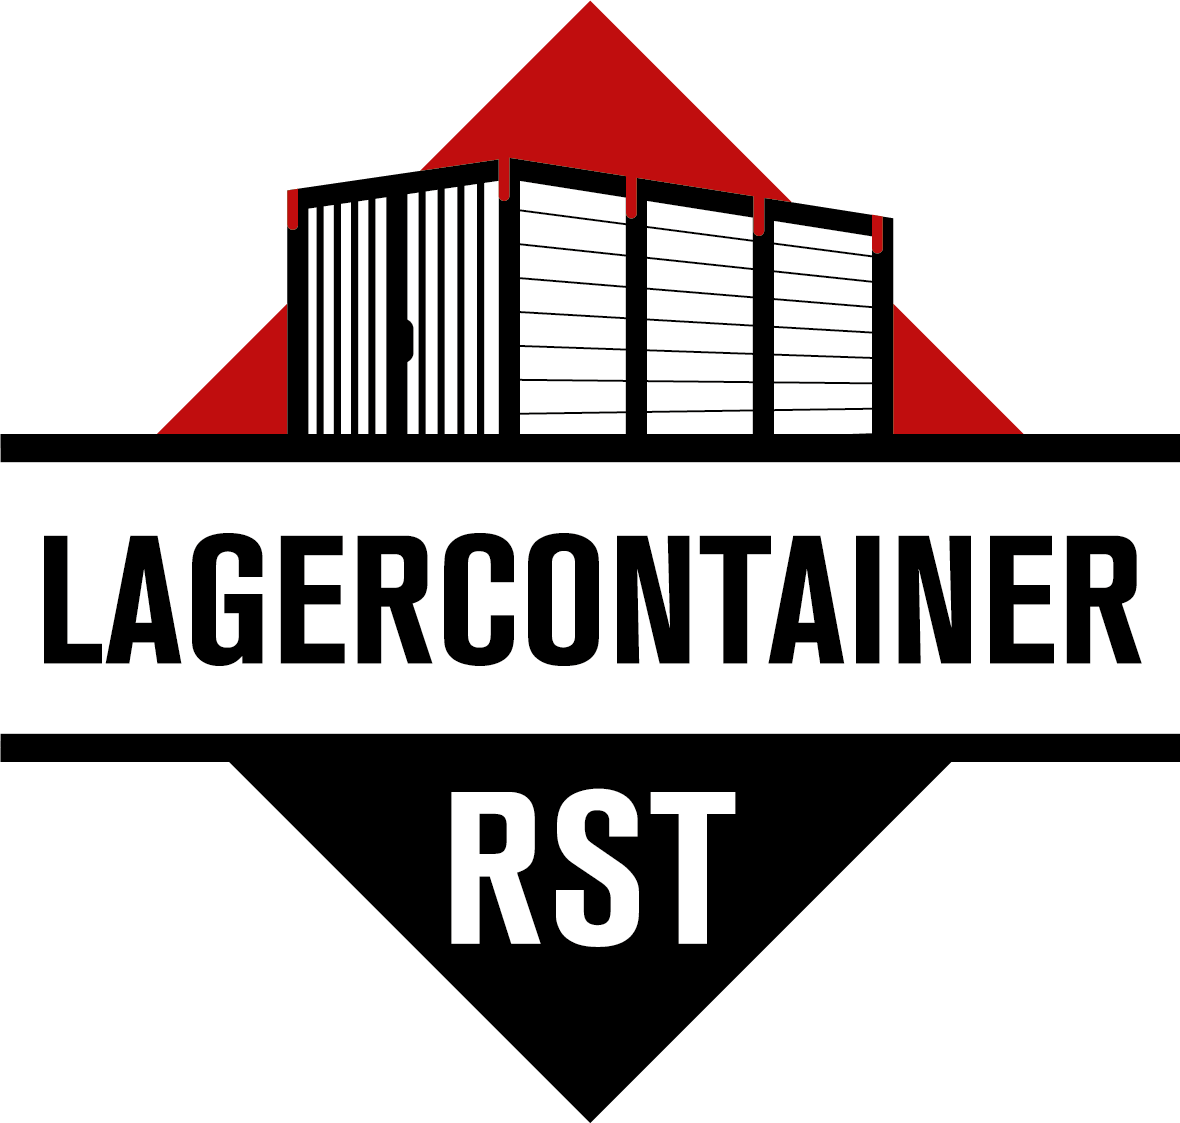 (c) Lagercontainer-rst.ch